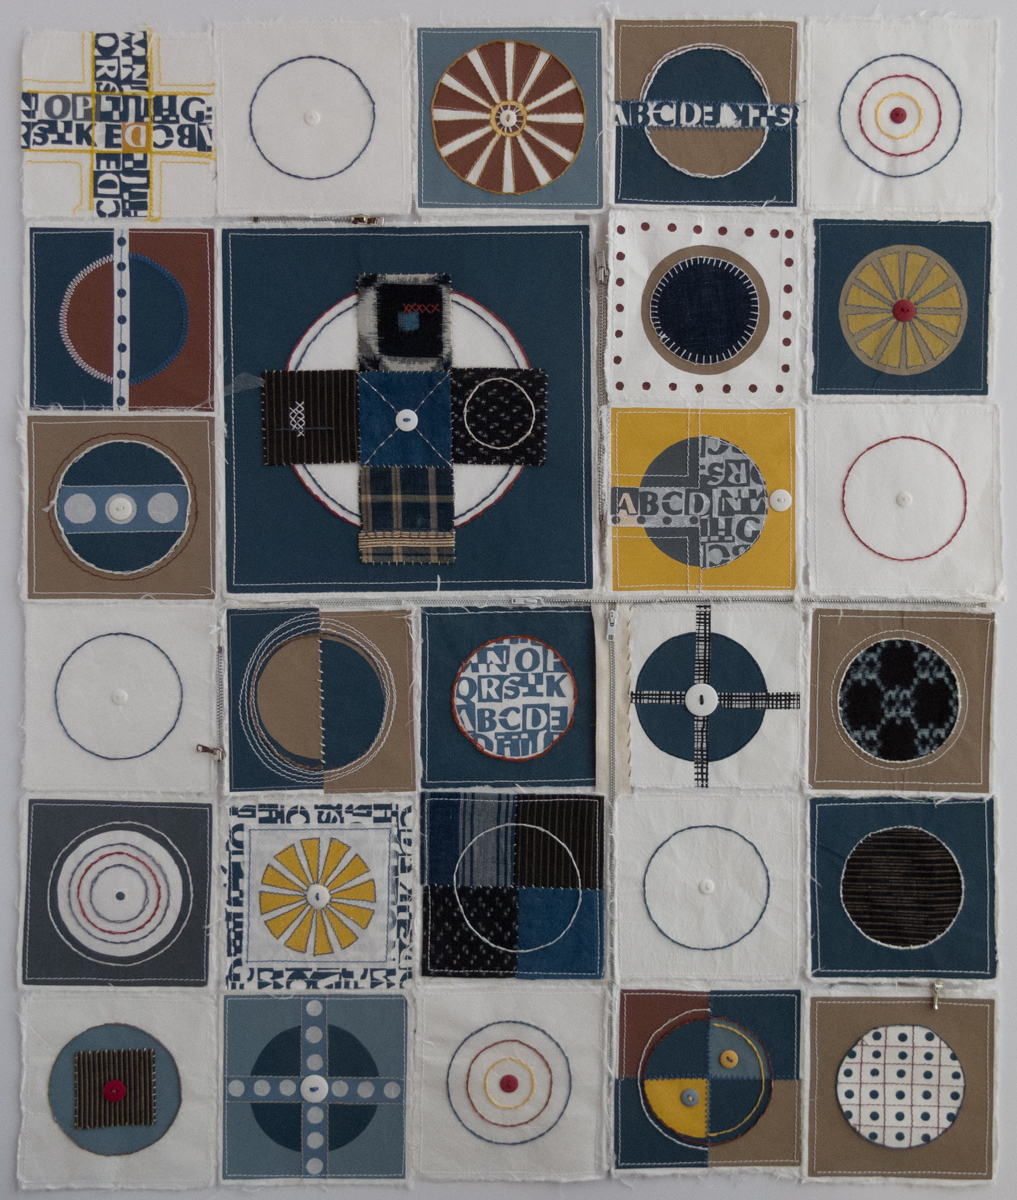  Regina S. Levin   Paper Quilt, Version One   Screenprint with collage and mixed media 